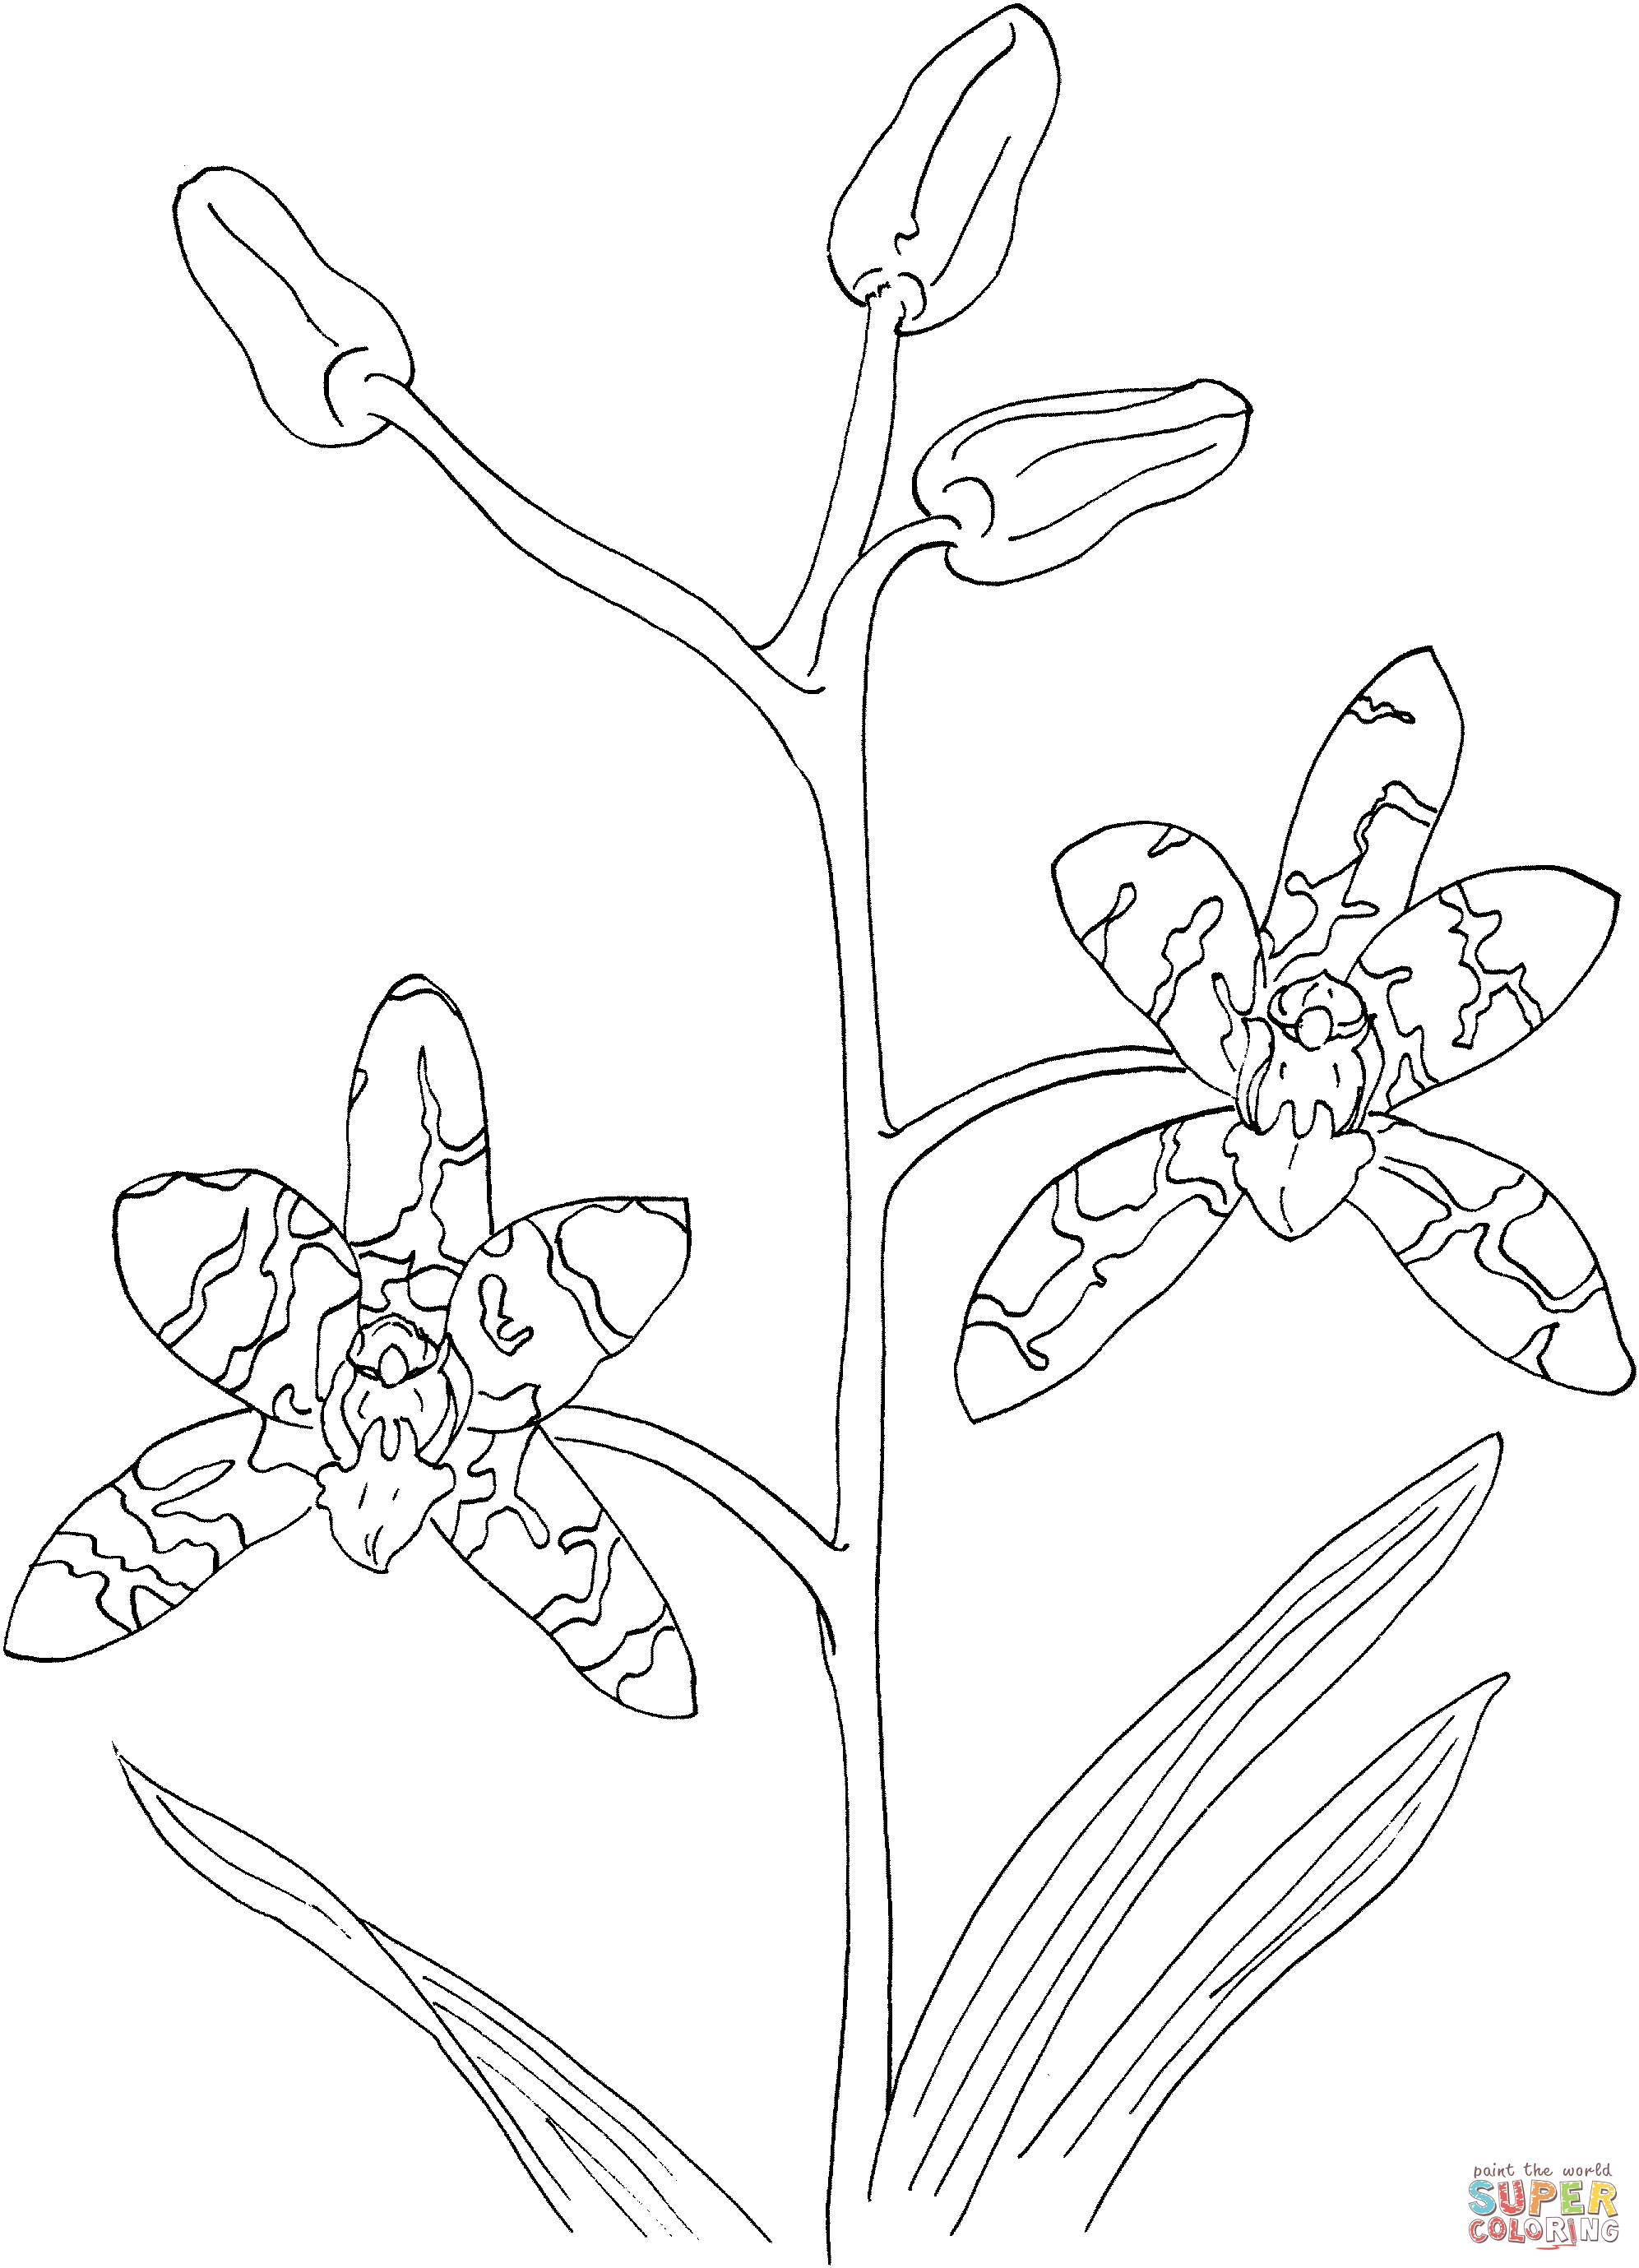 African Ansellia or Leopard Orchid Coloring Page